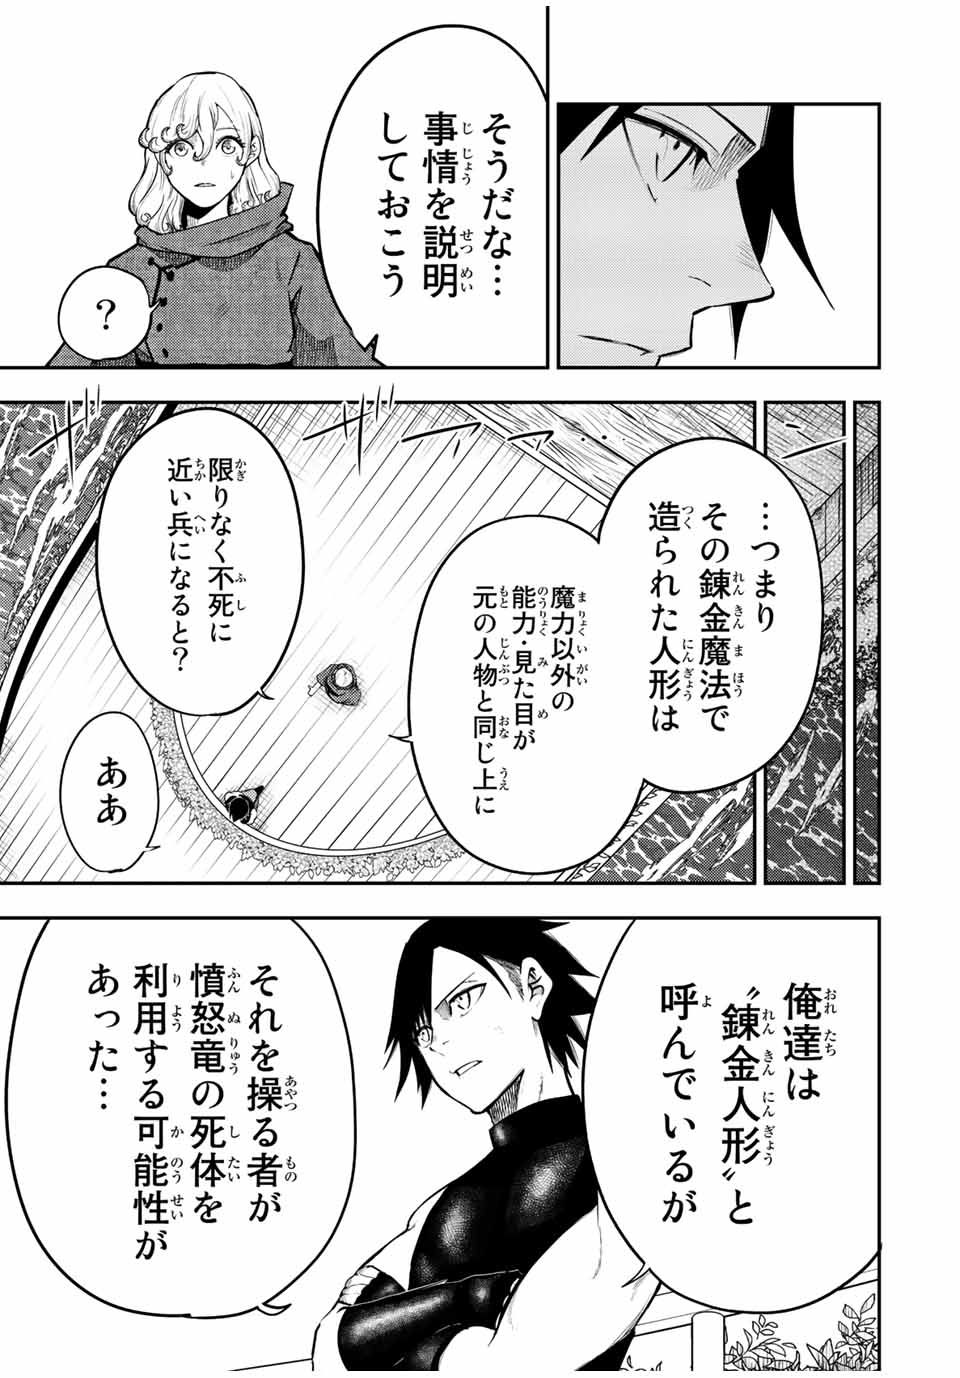 the strongest former prince-; 奴隷転生 ～その奴隷、最強の元王子につき～ 第65話 - Page 15